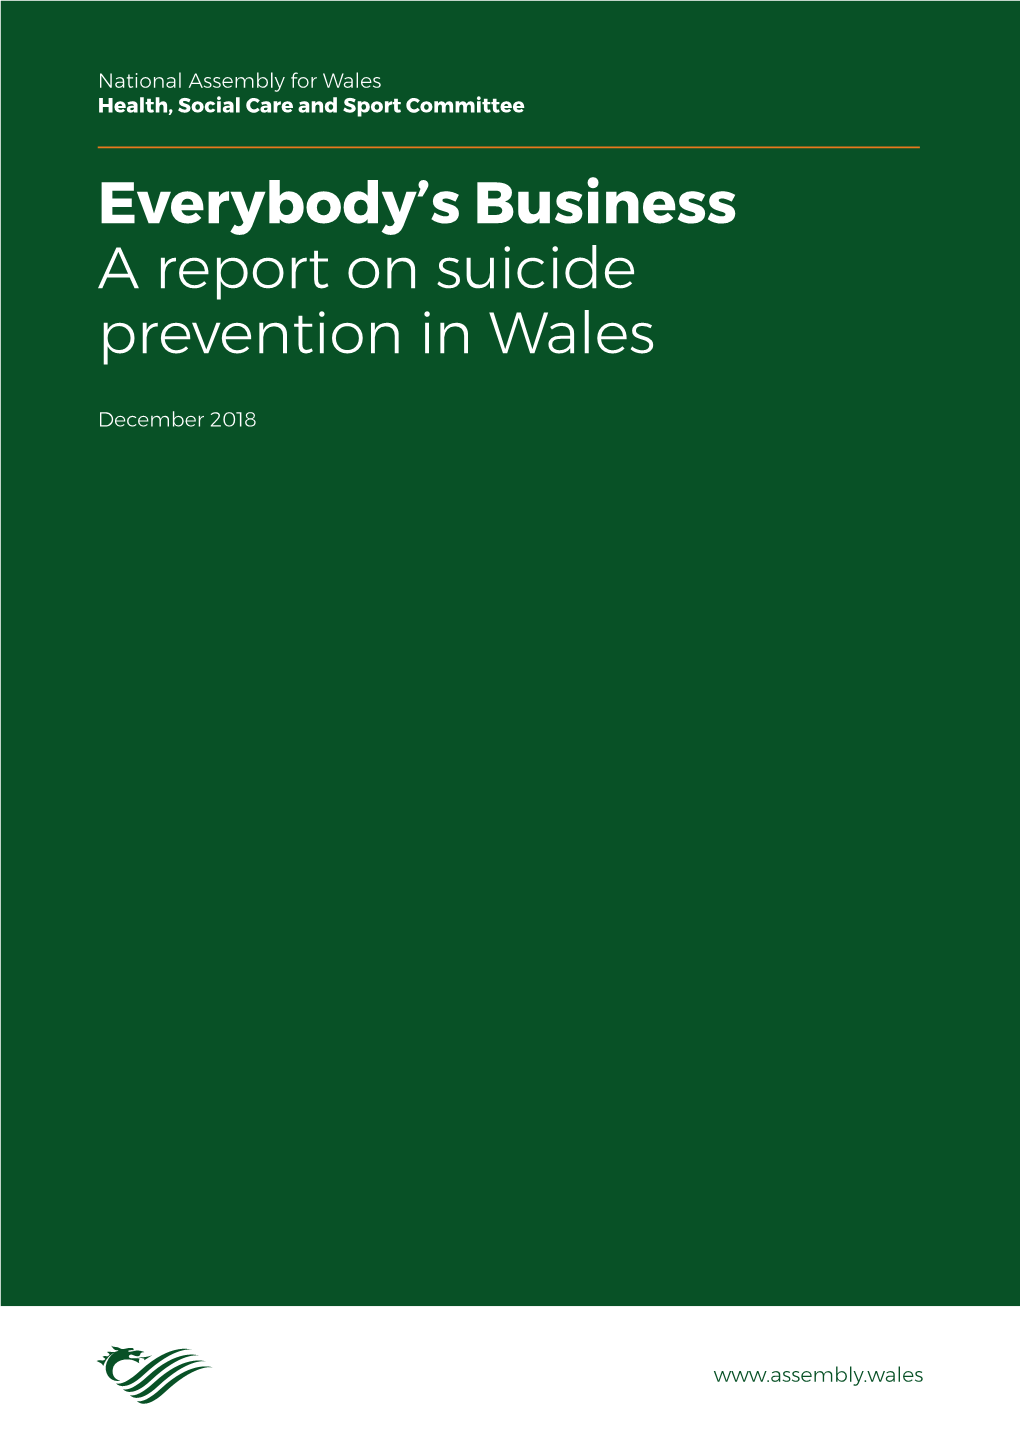 Everybody's Business a Report on Suicide Prevention in Wales